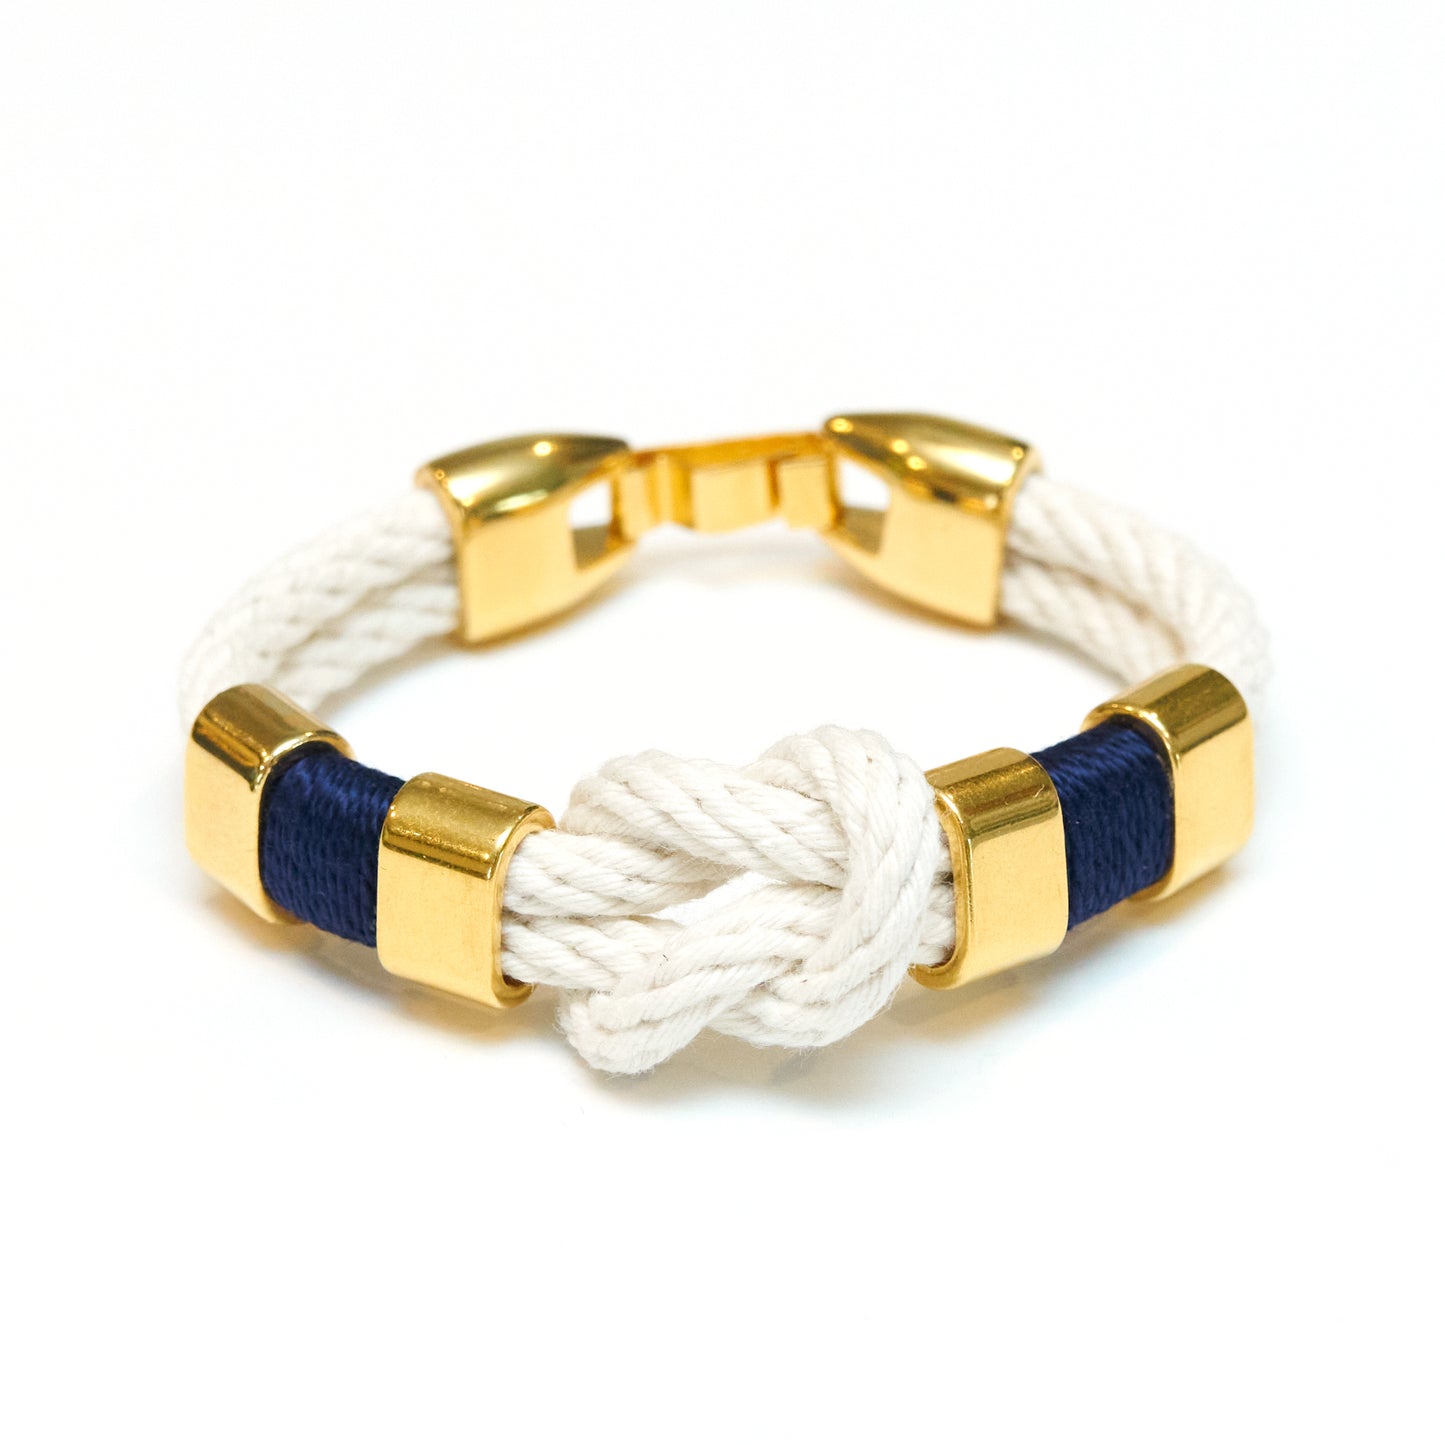 Nautical ivory knot rope braelet with navy and gold details